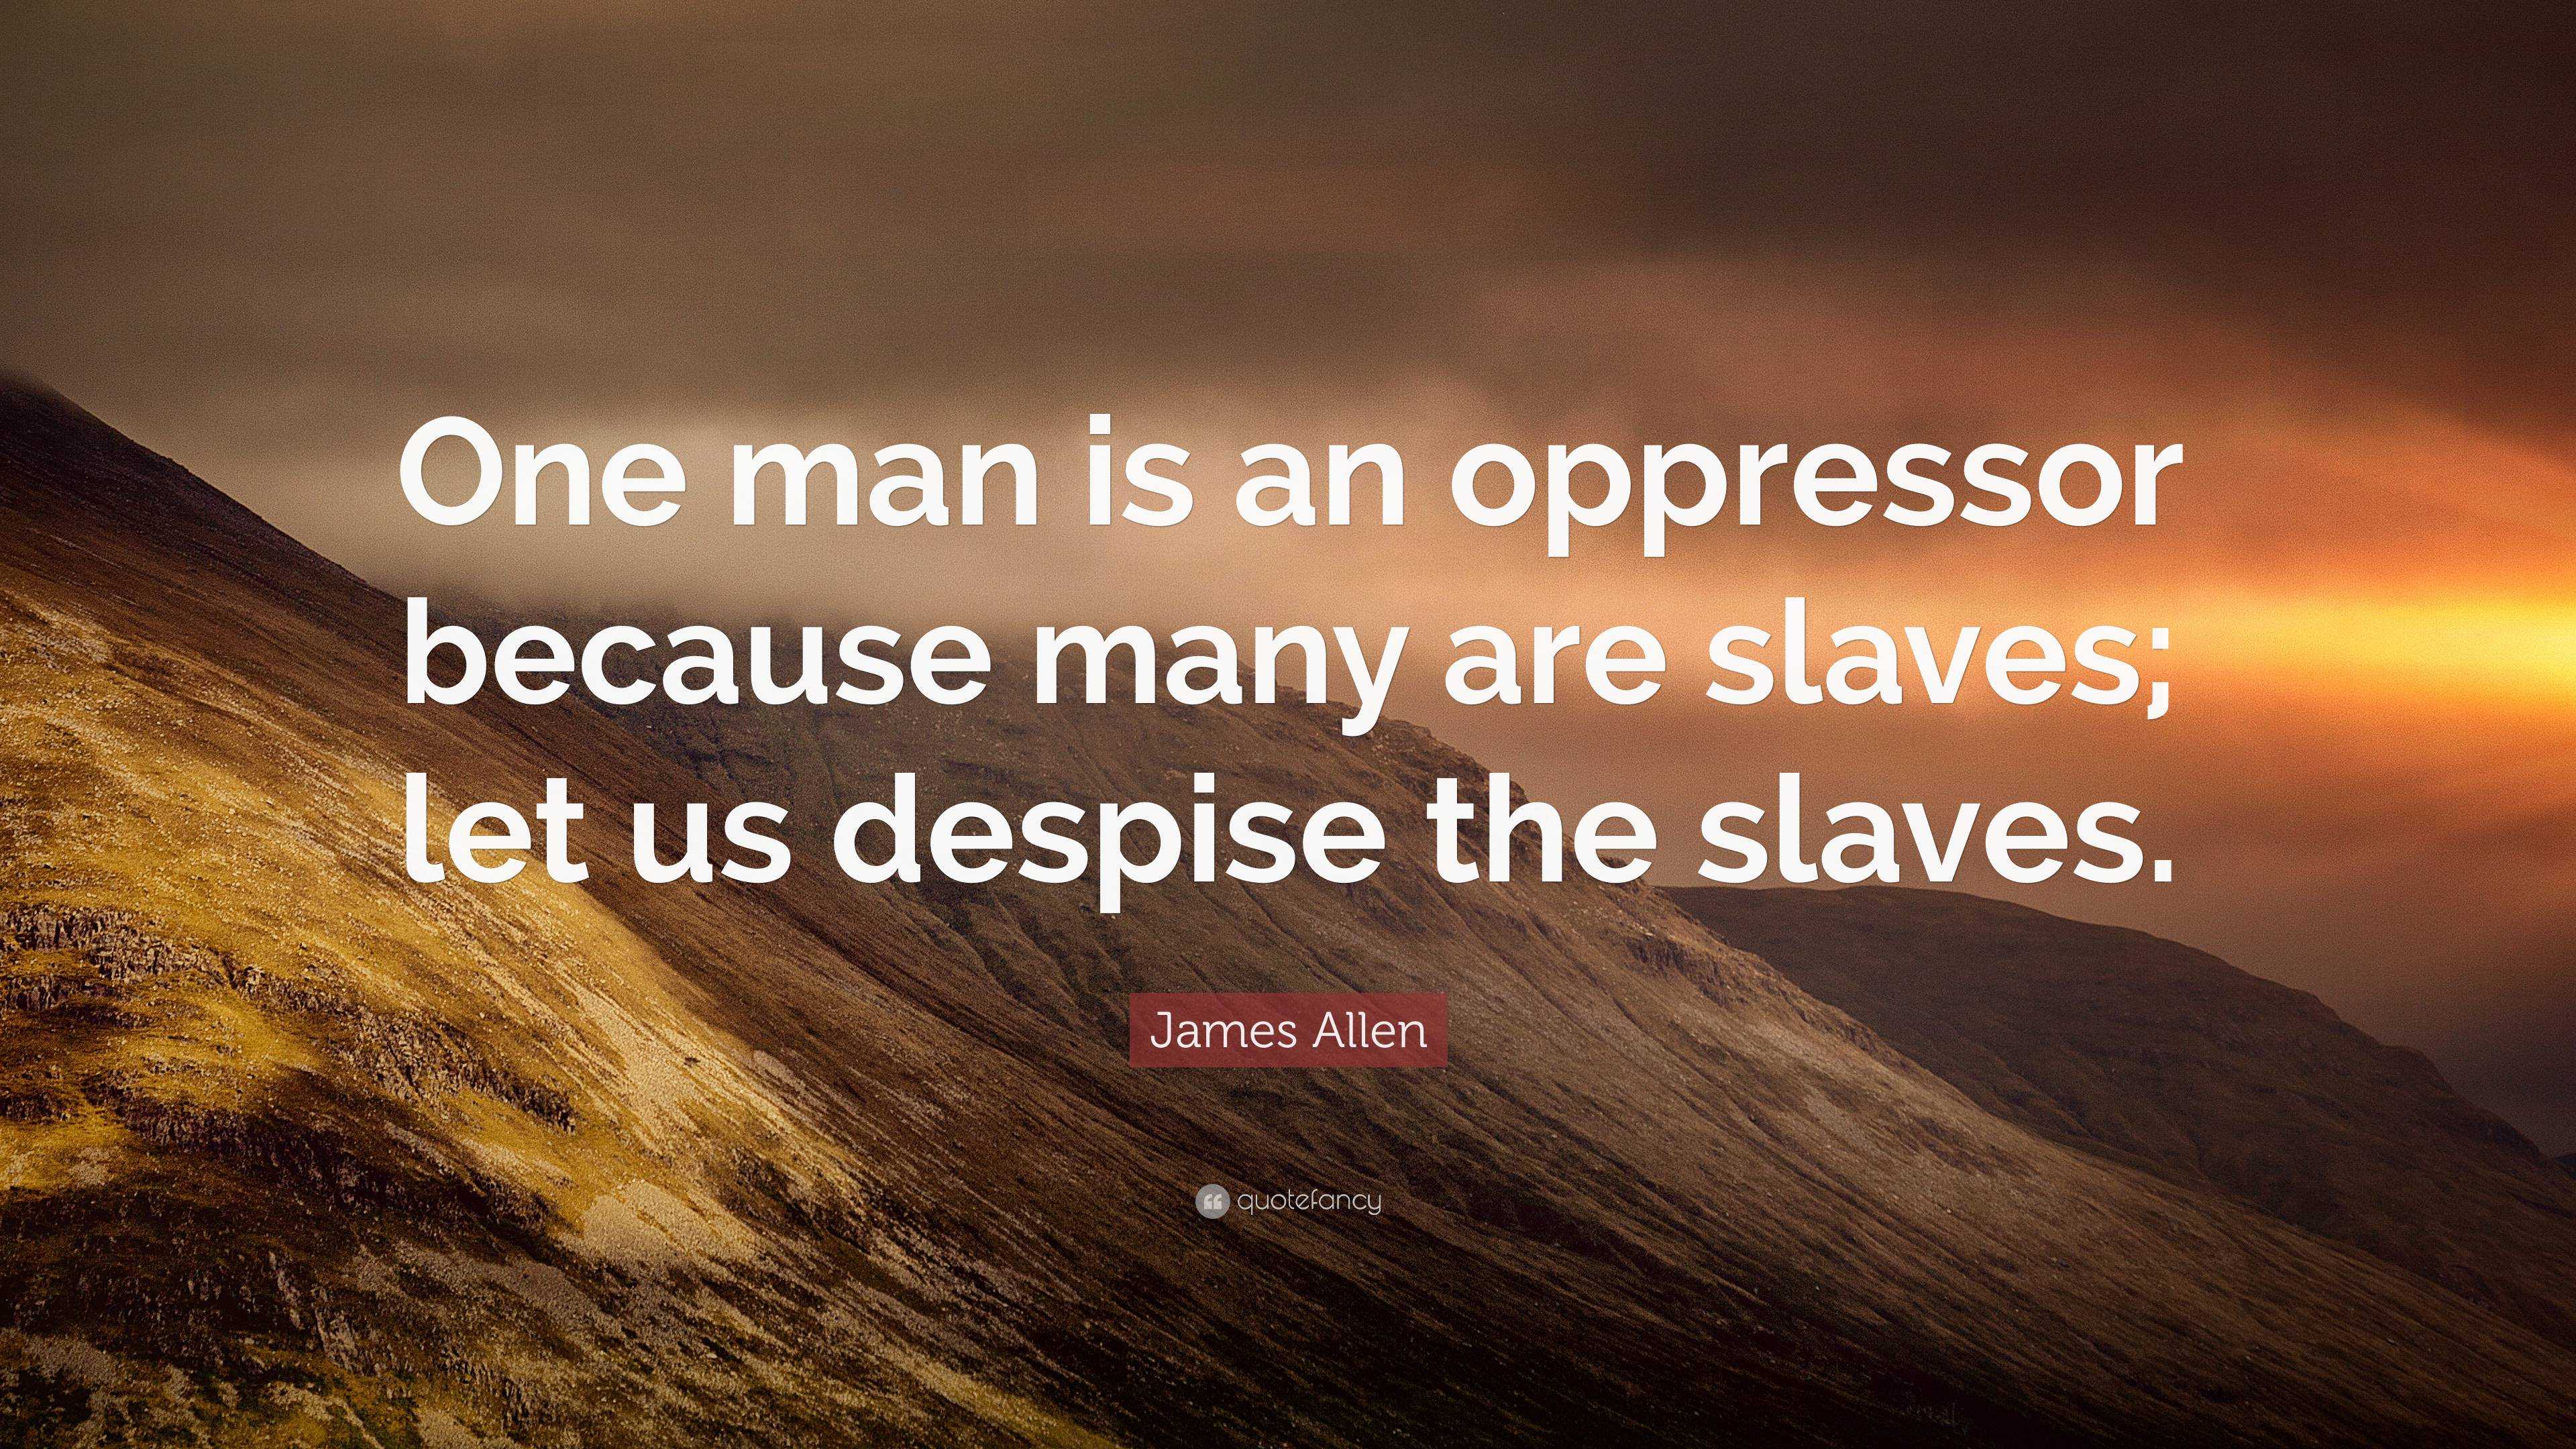 James Allen Quote: “One man is an oppressor because many are slaves ...